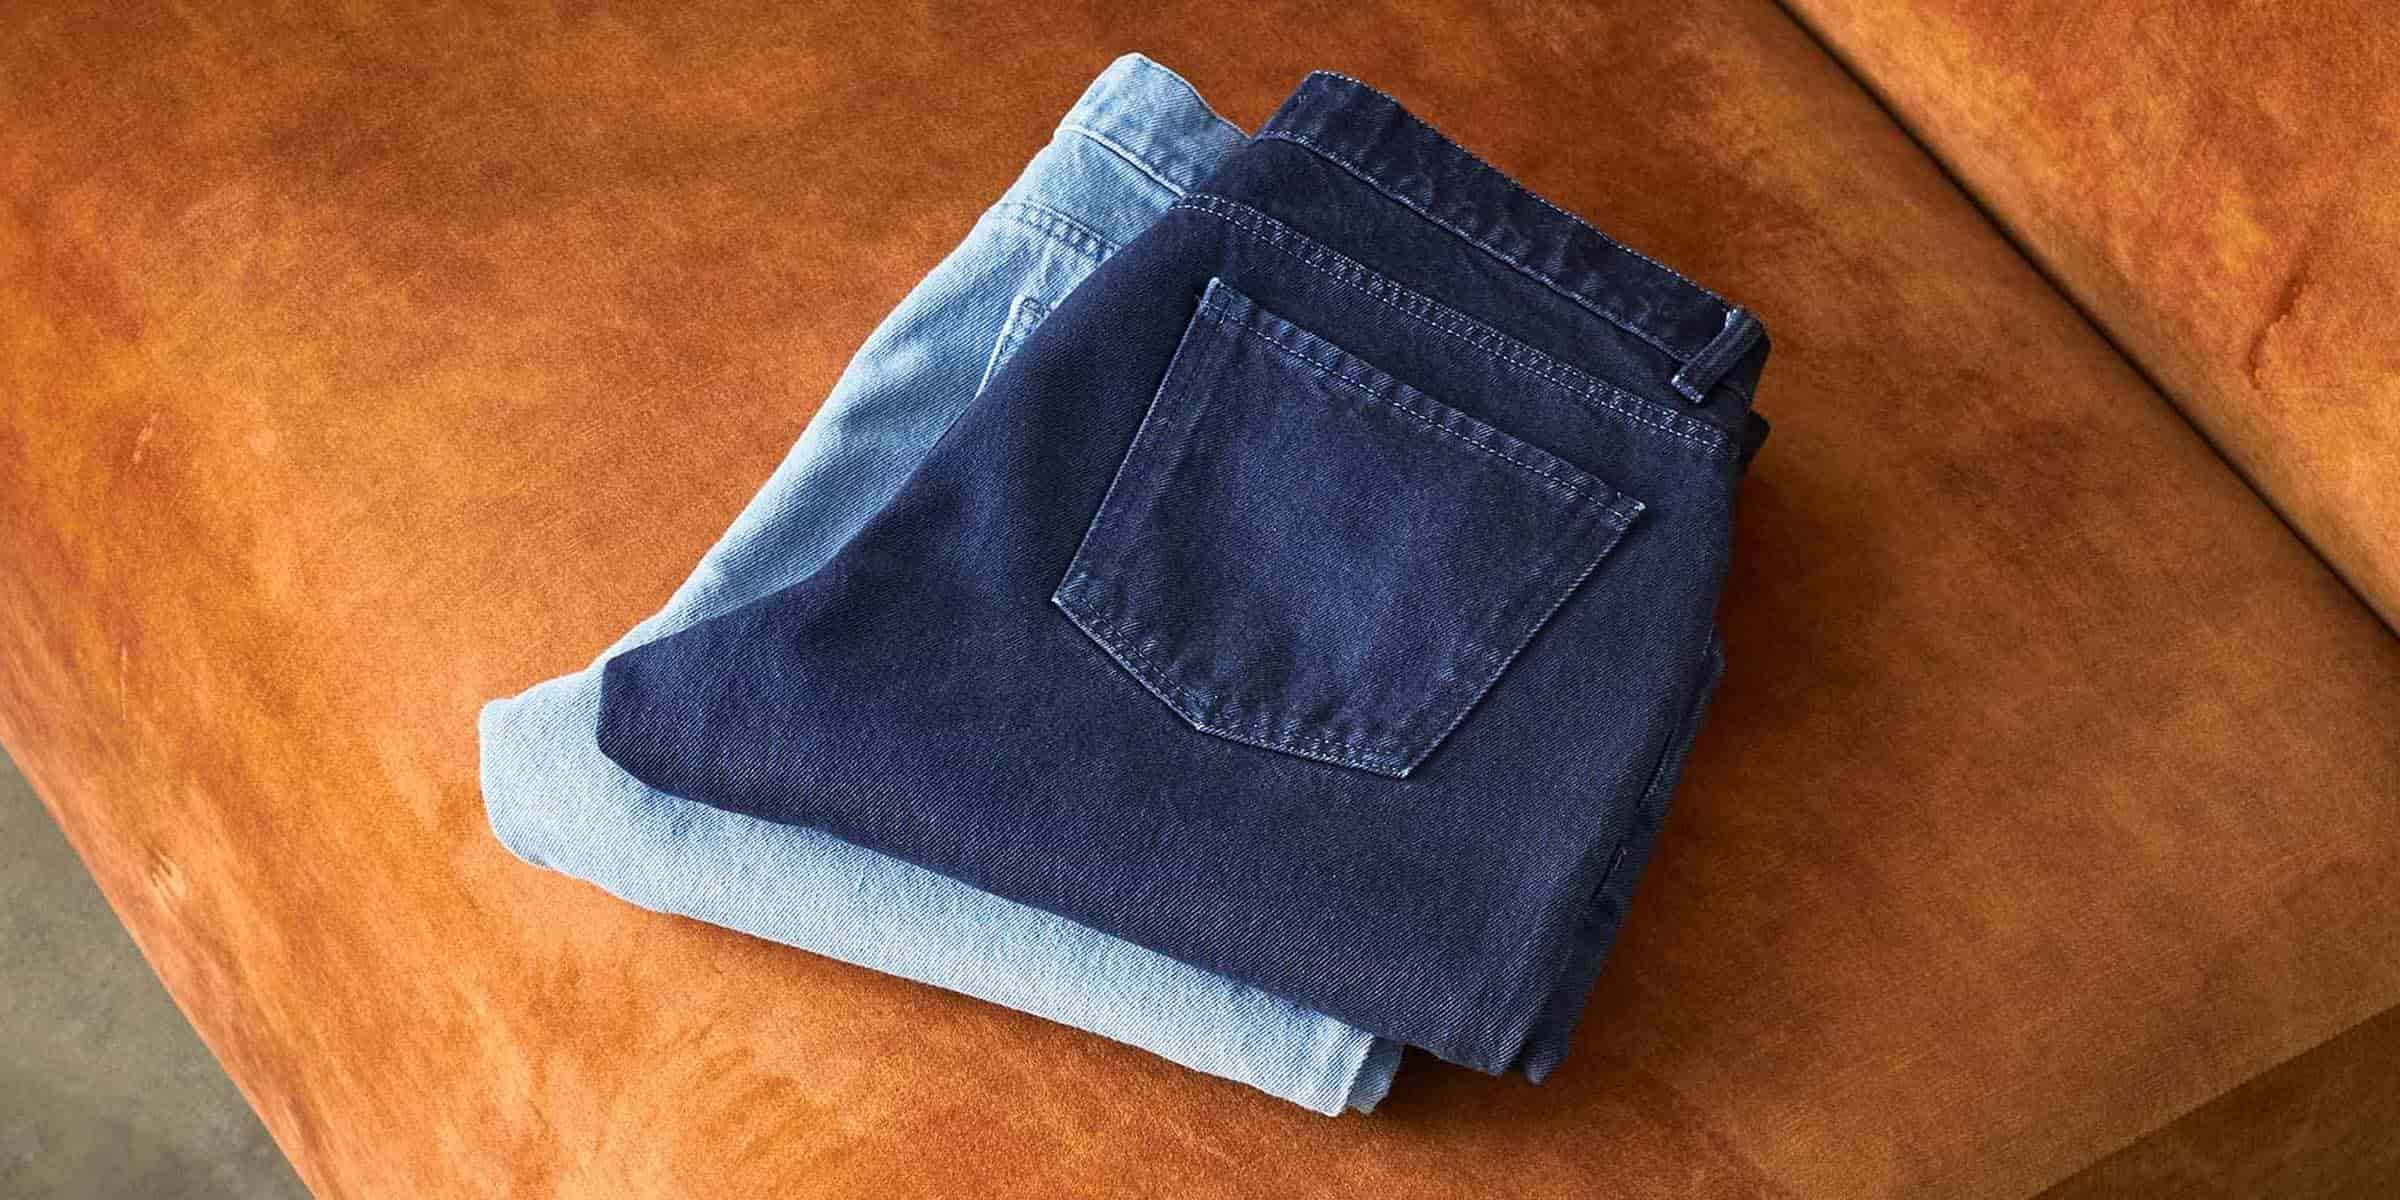 Sene Studio Jeans Review: Uncover the Power behind these Denim Wonders